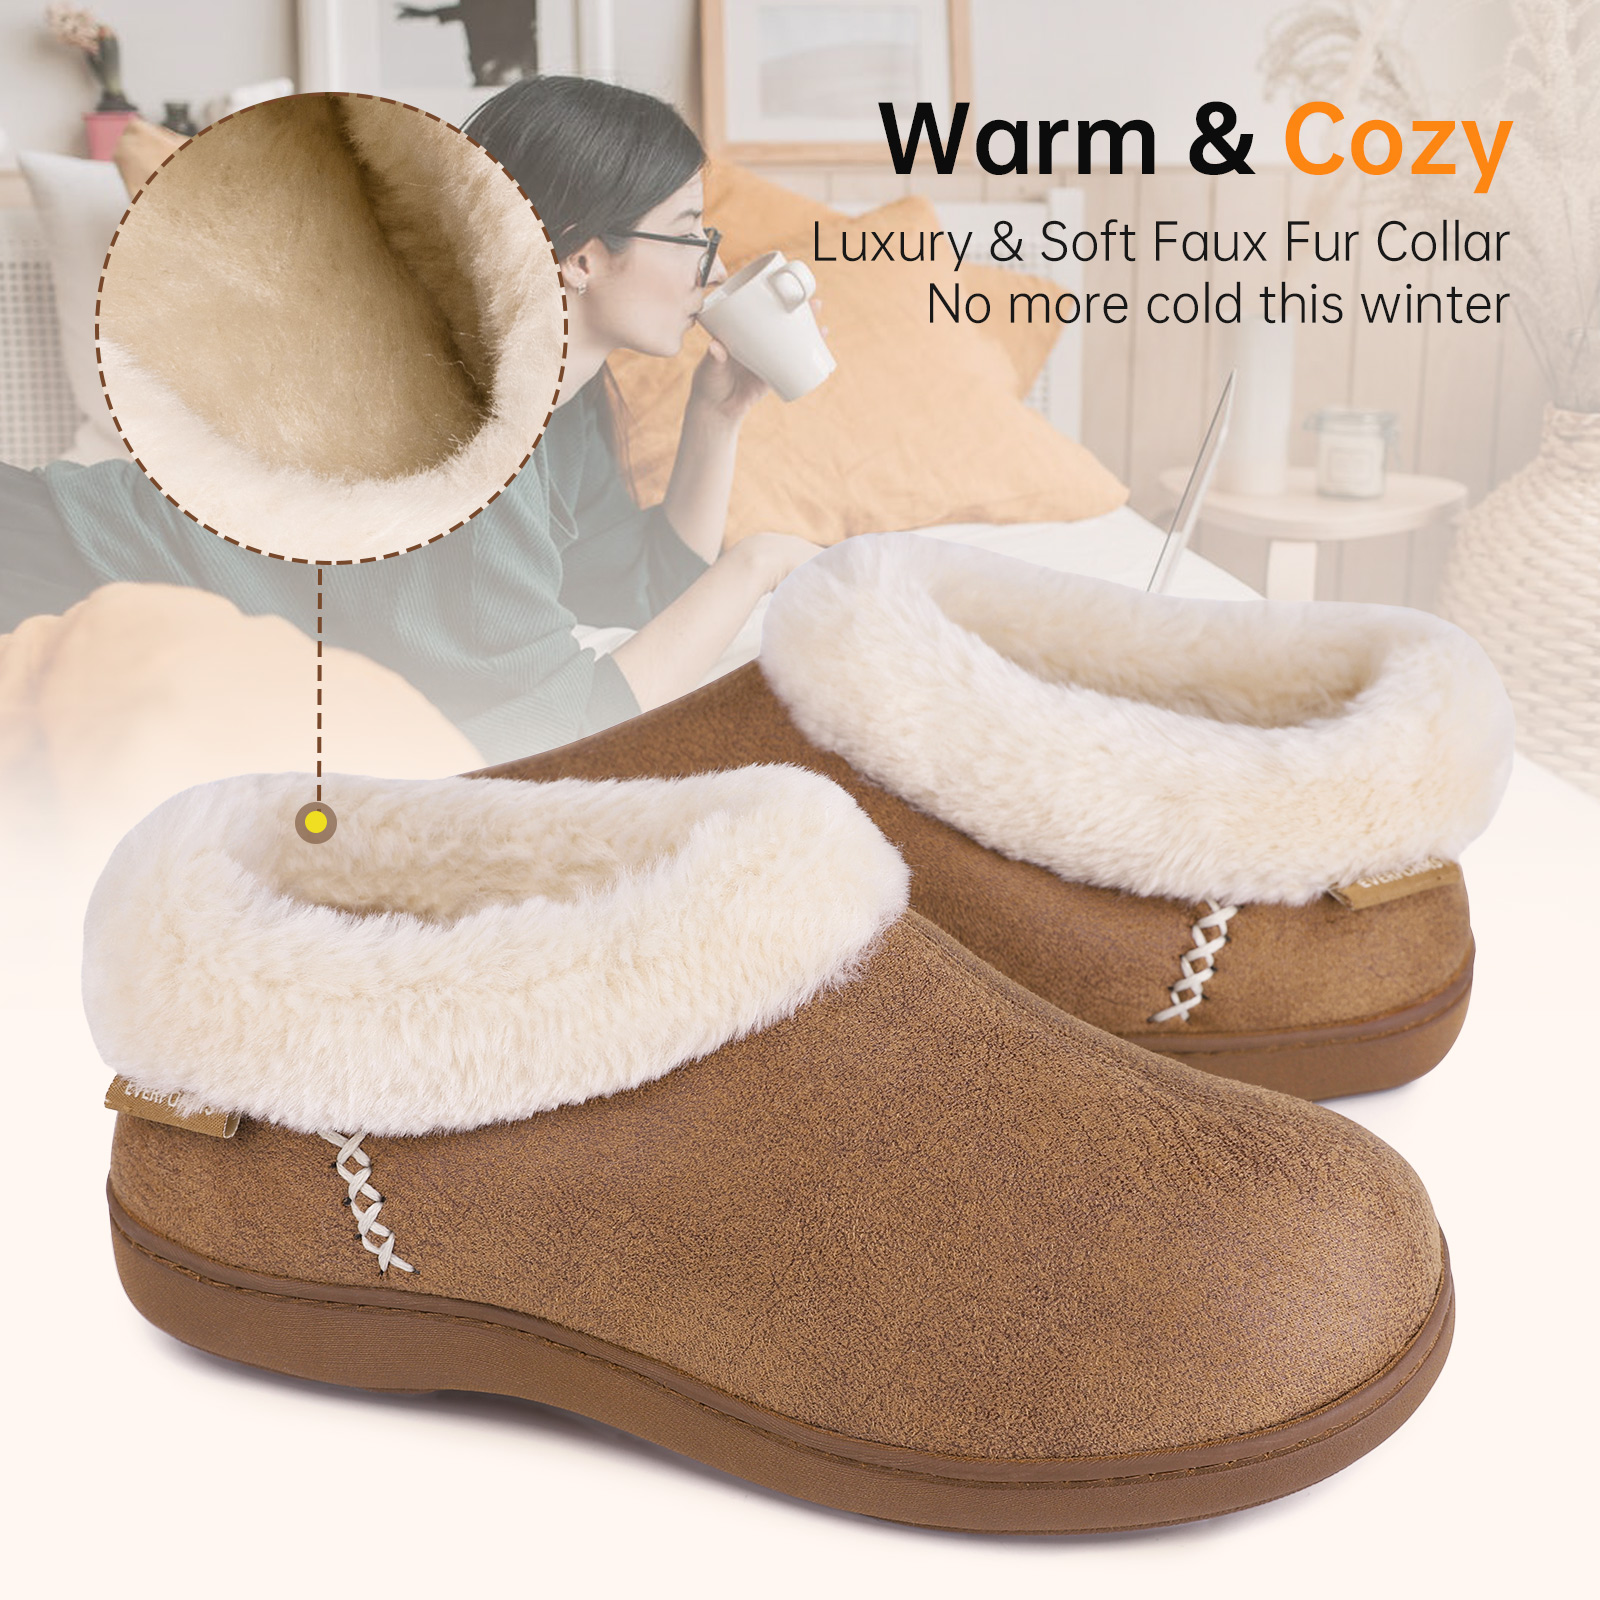 EverFoams Women's Micro Suede Cozy Memory Foam Winter Slippers with Fuzzy Faux Fur Collar and Indoor Outdoor Rubber Sole - image 3 of 6